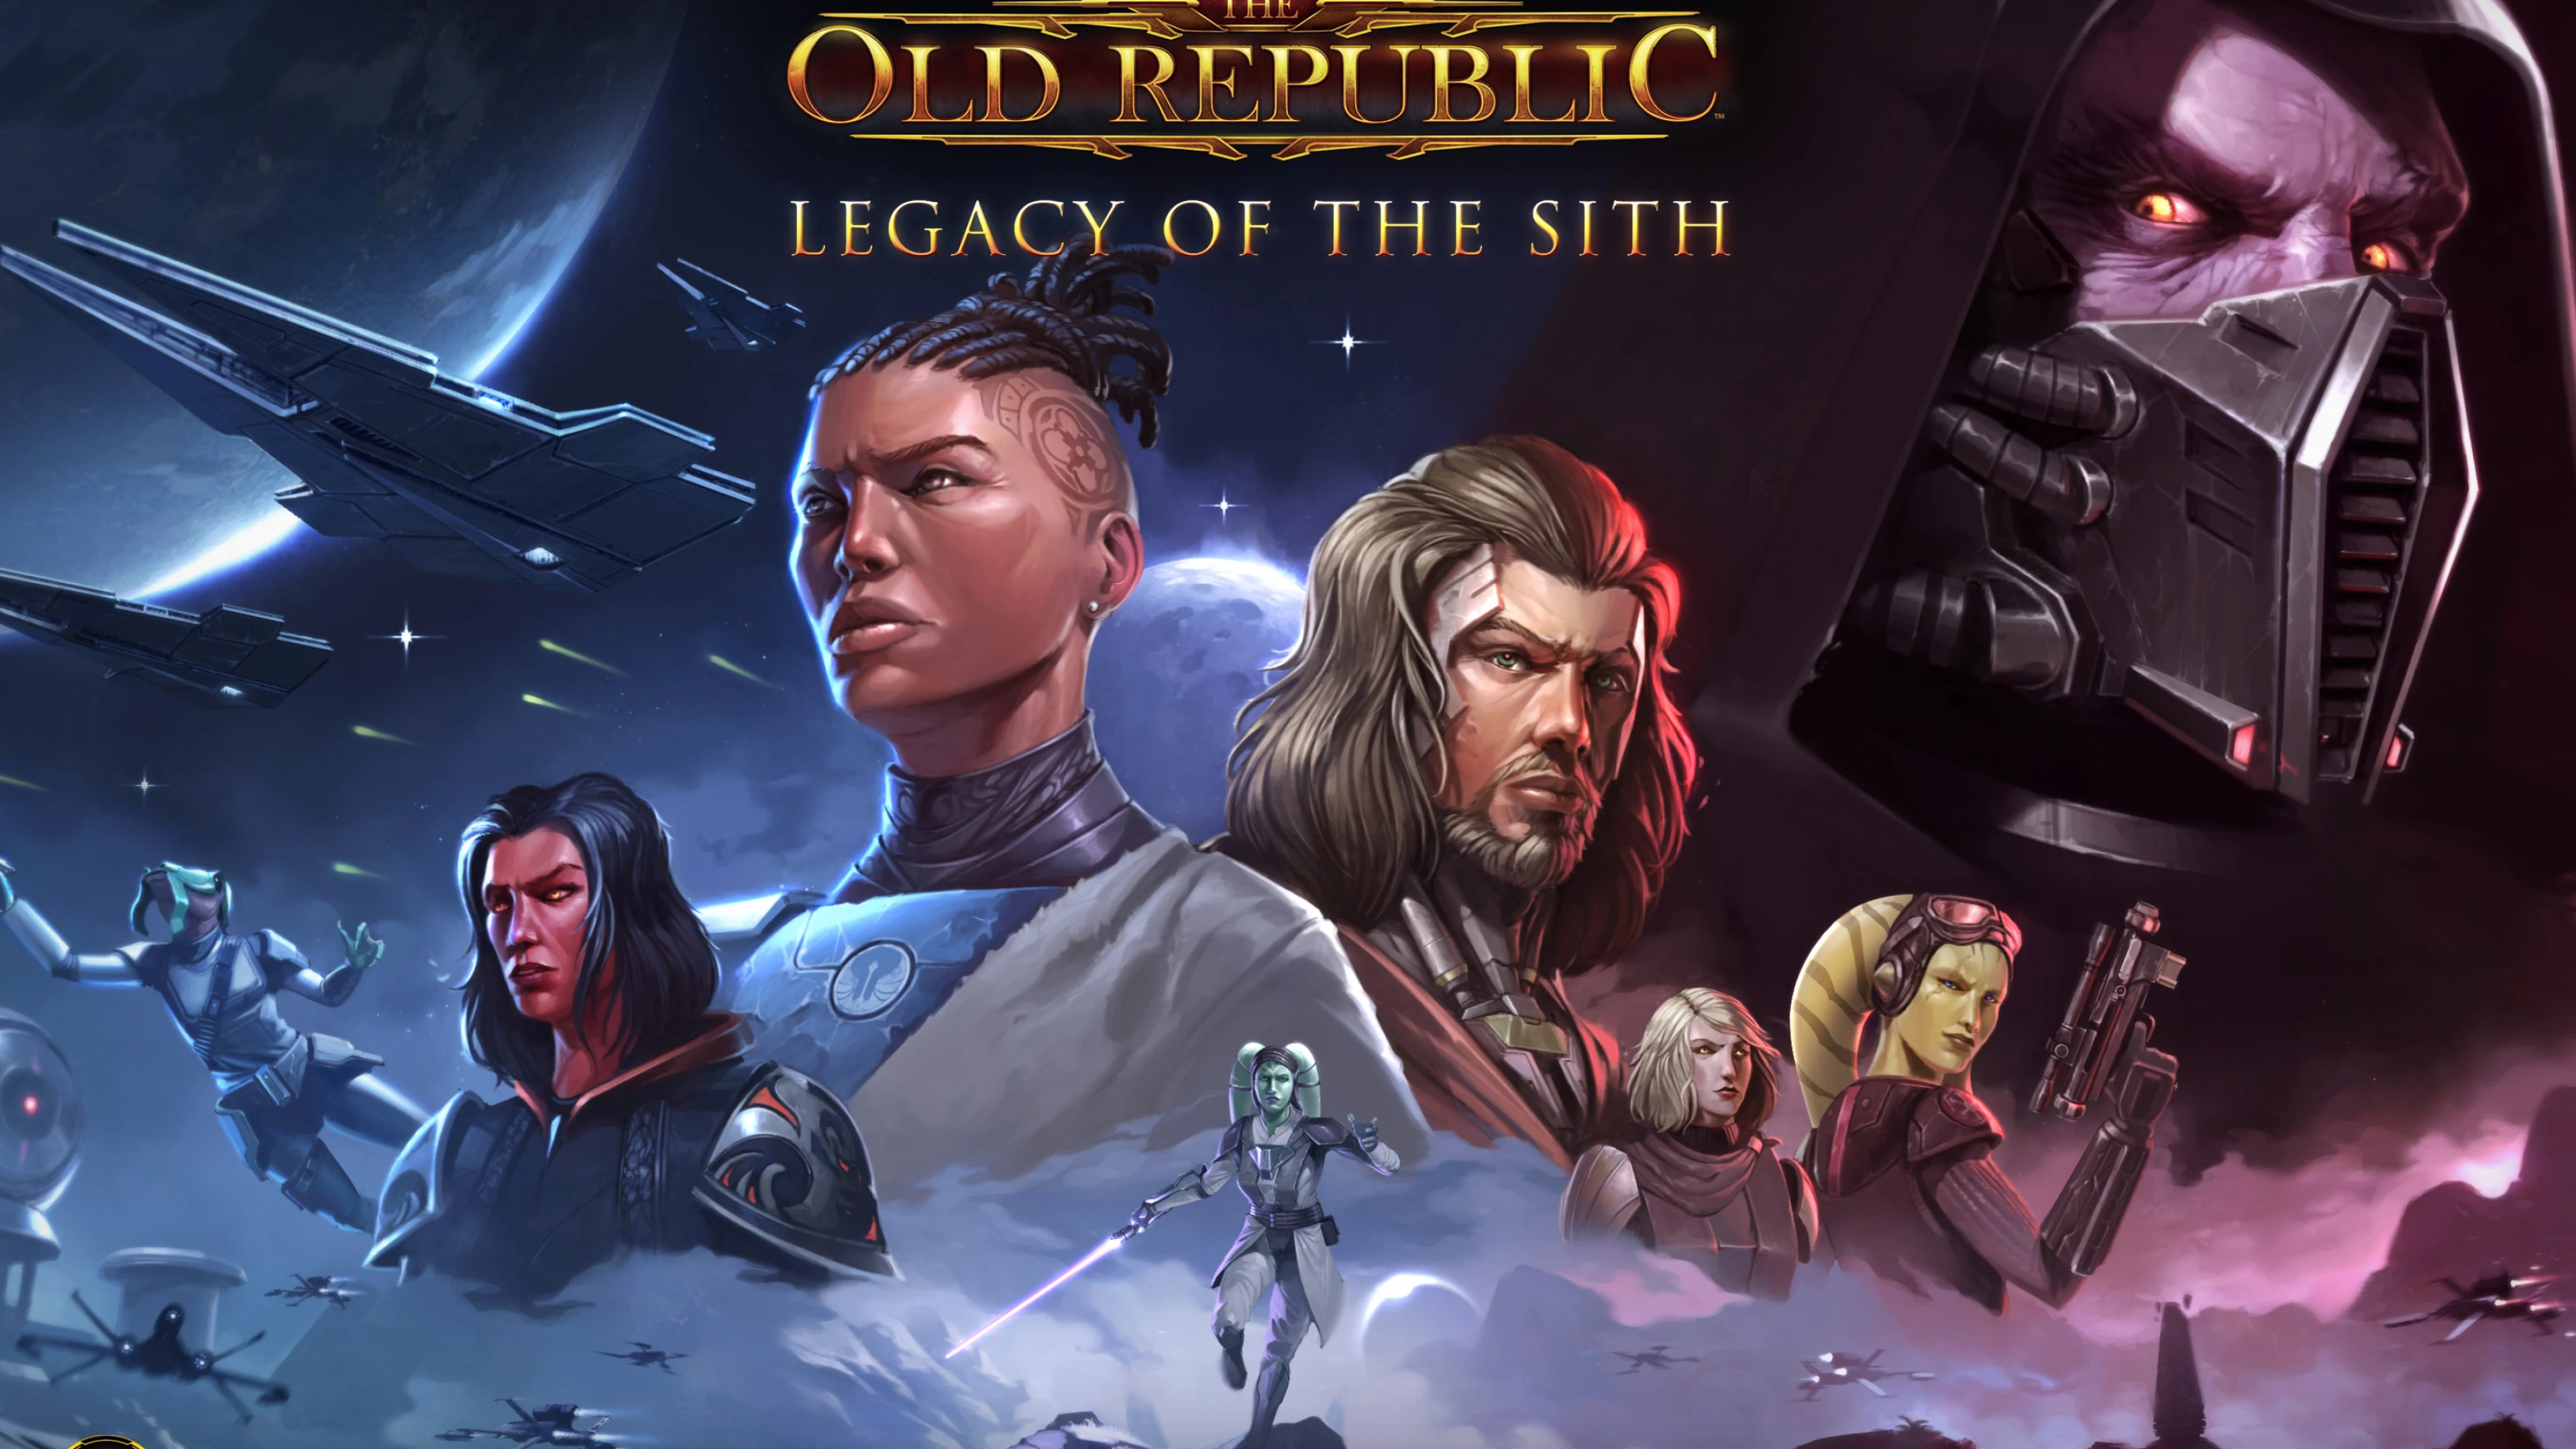 Star Wars: The Old Republic, Legacy of the Sith, Wookieepedia reference, Fan-driven encyclopedia, 3840x2160 4K Desktop